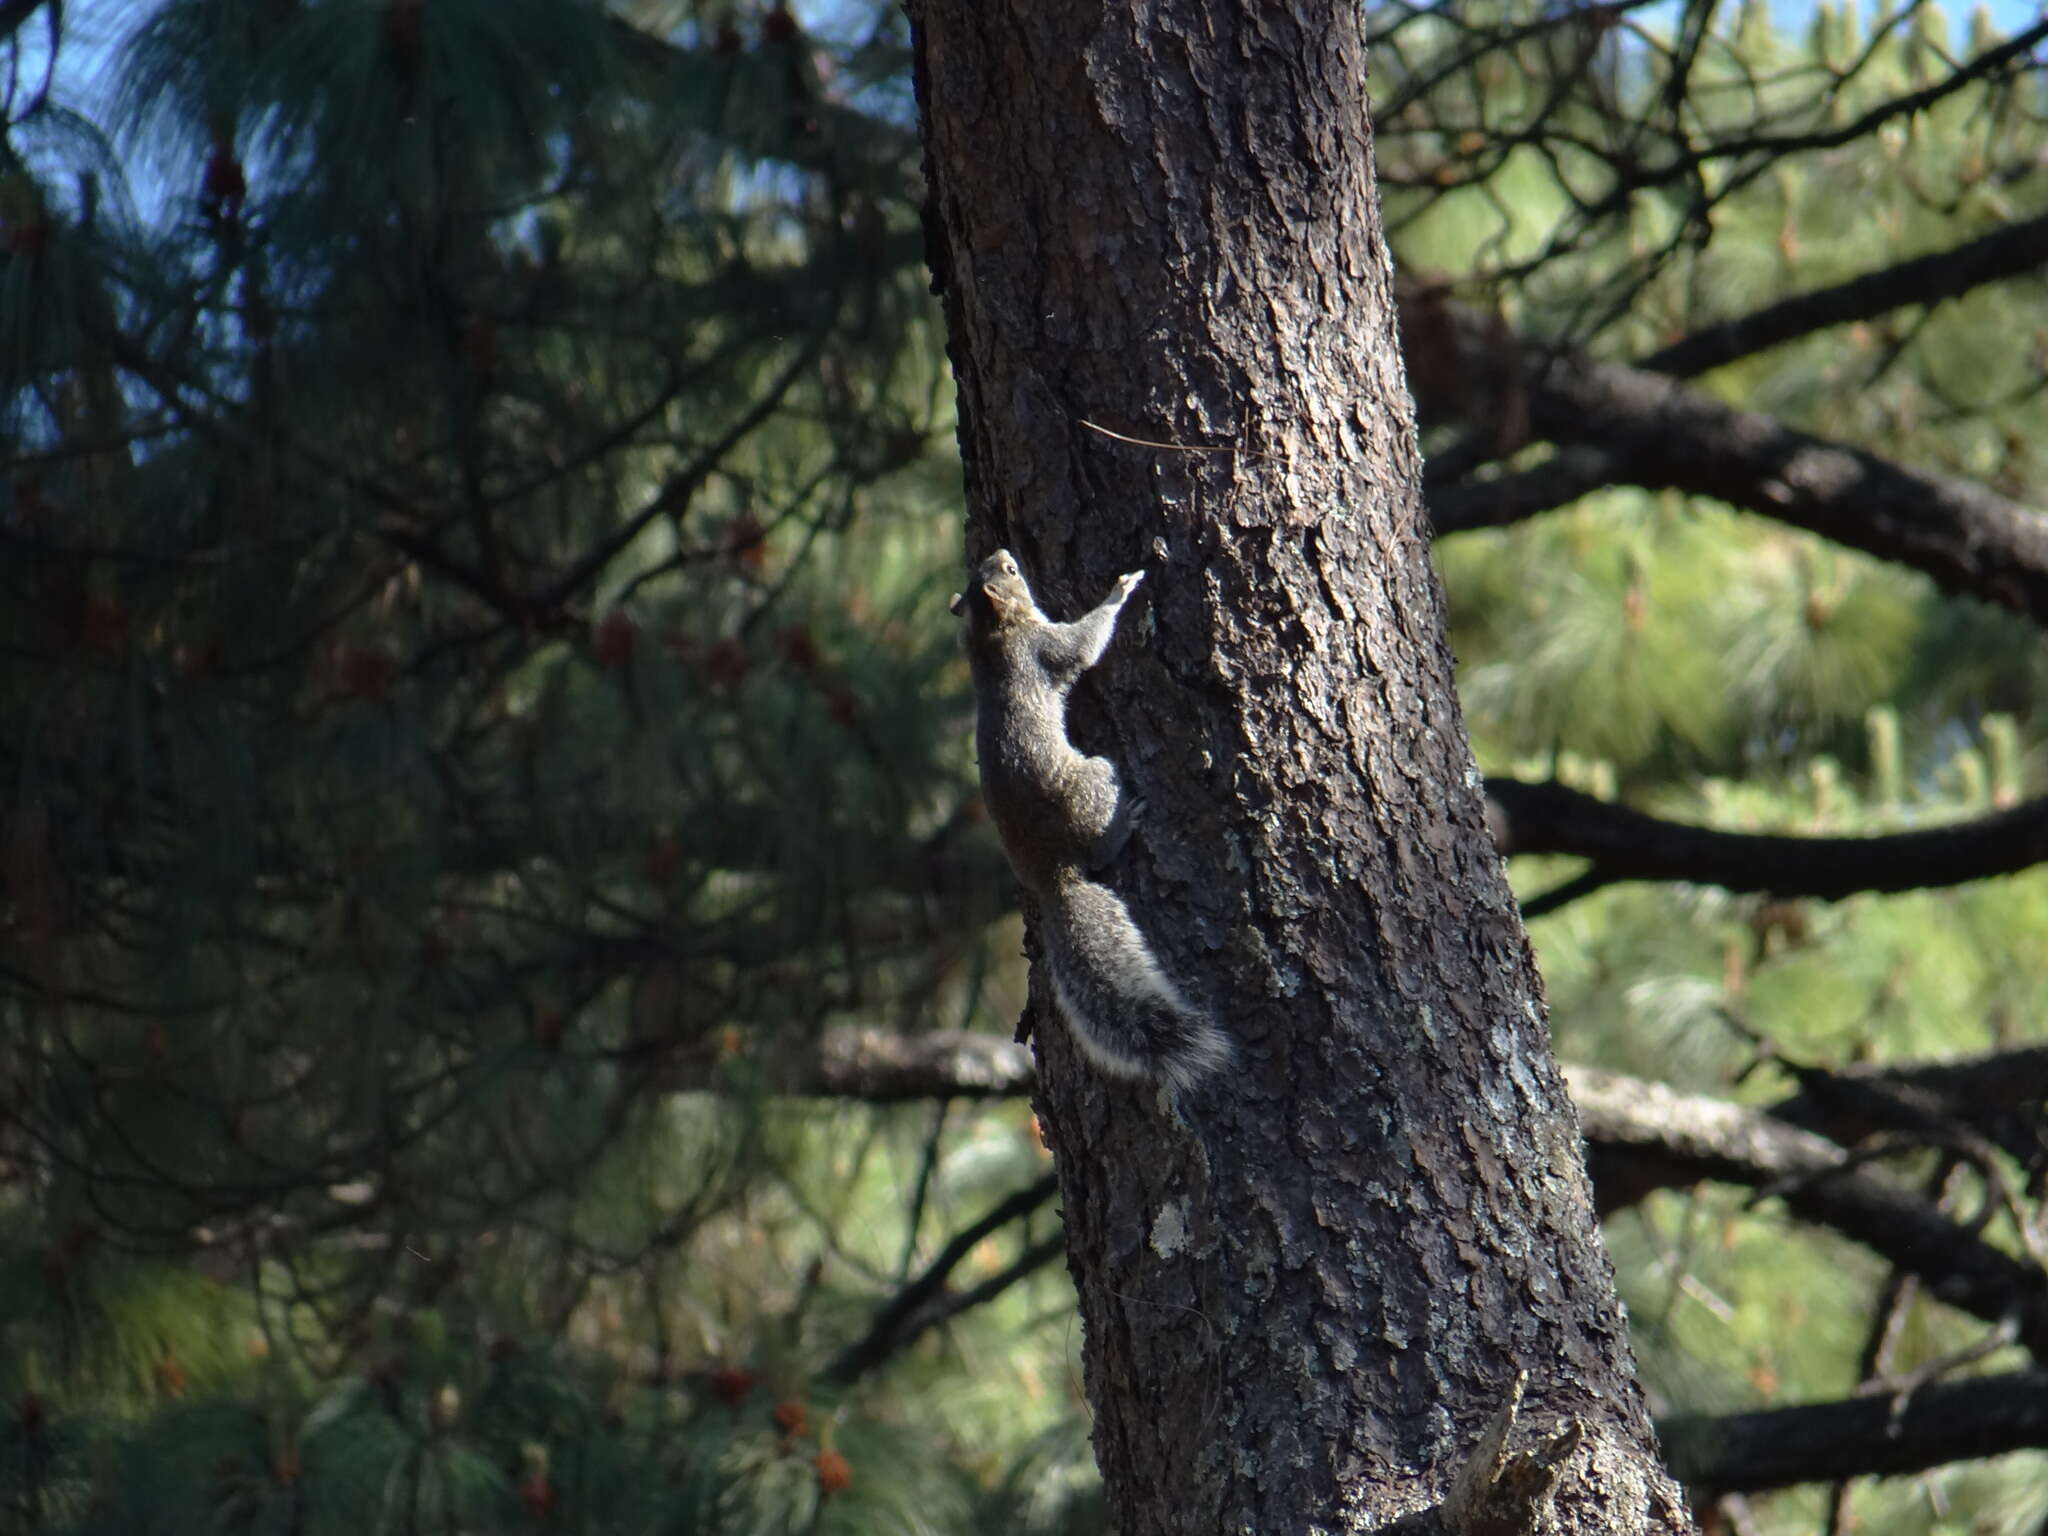 Image of Peters's squirrel